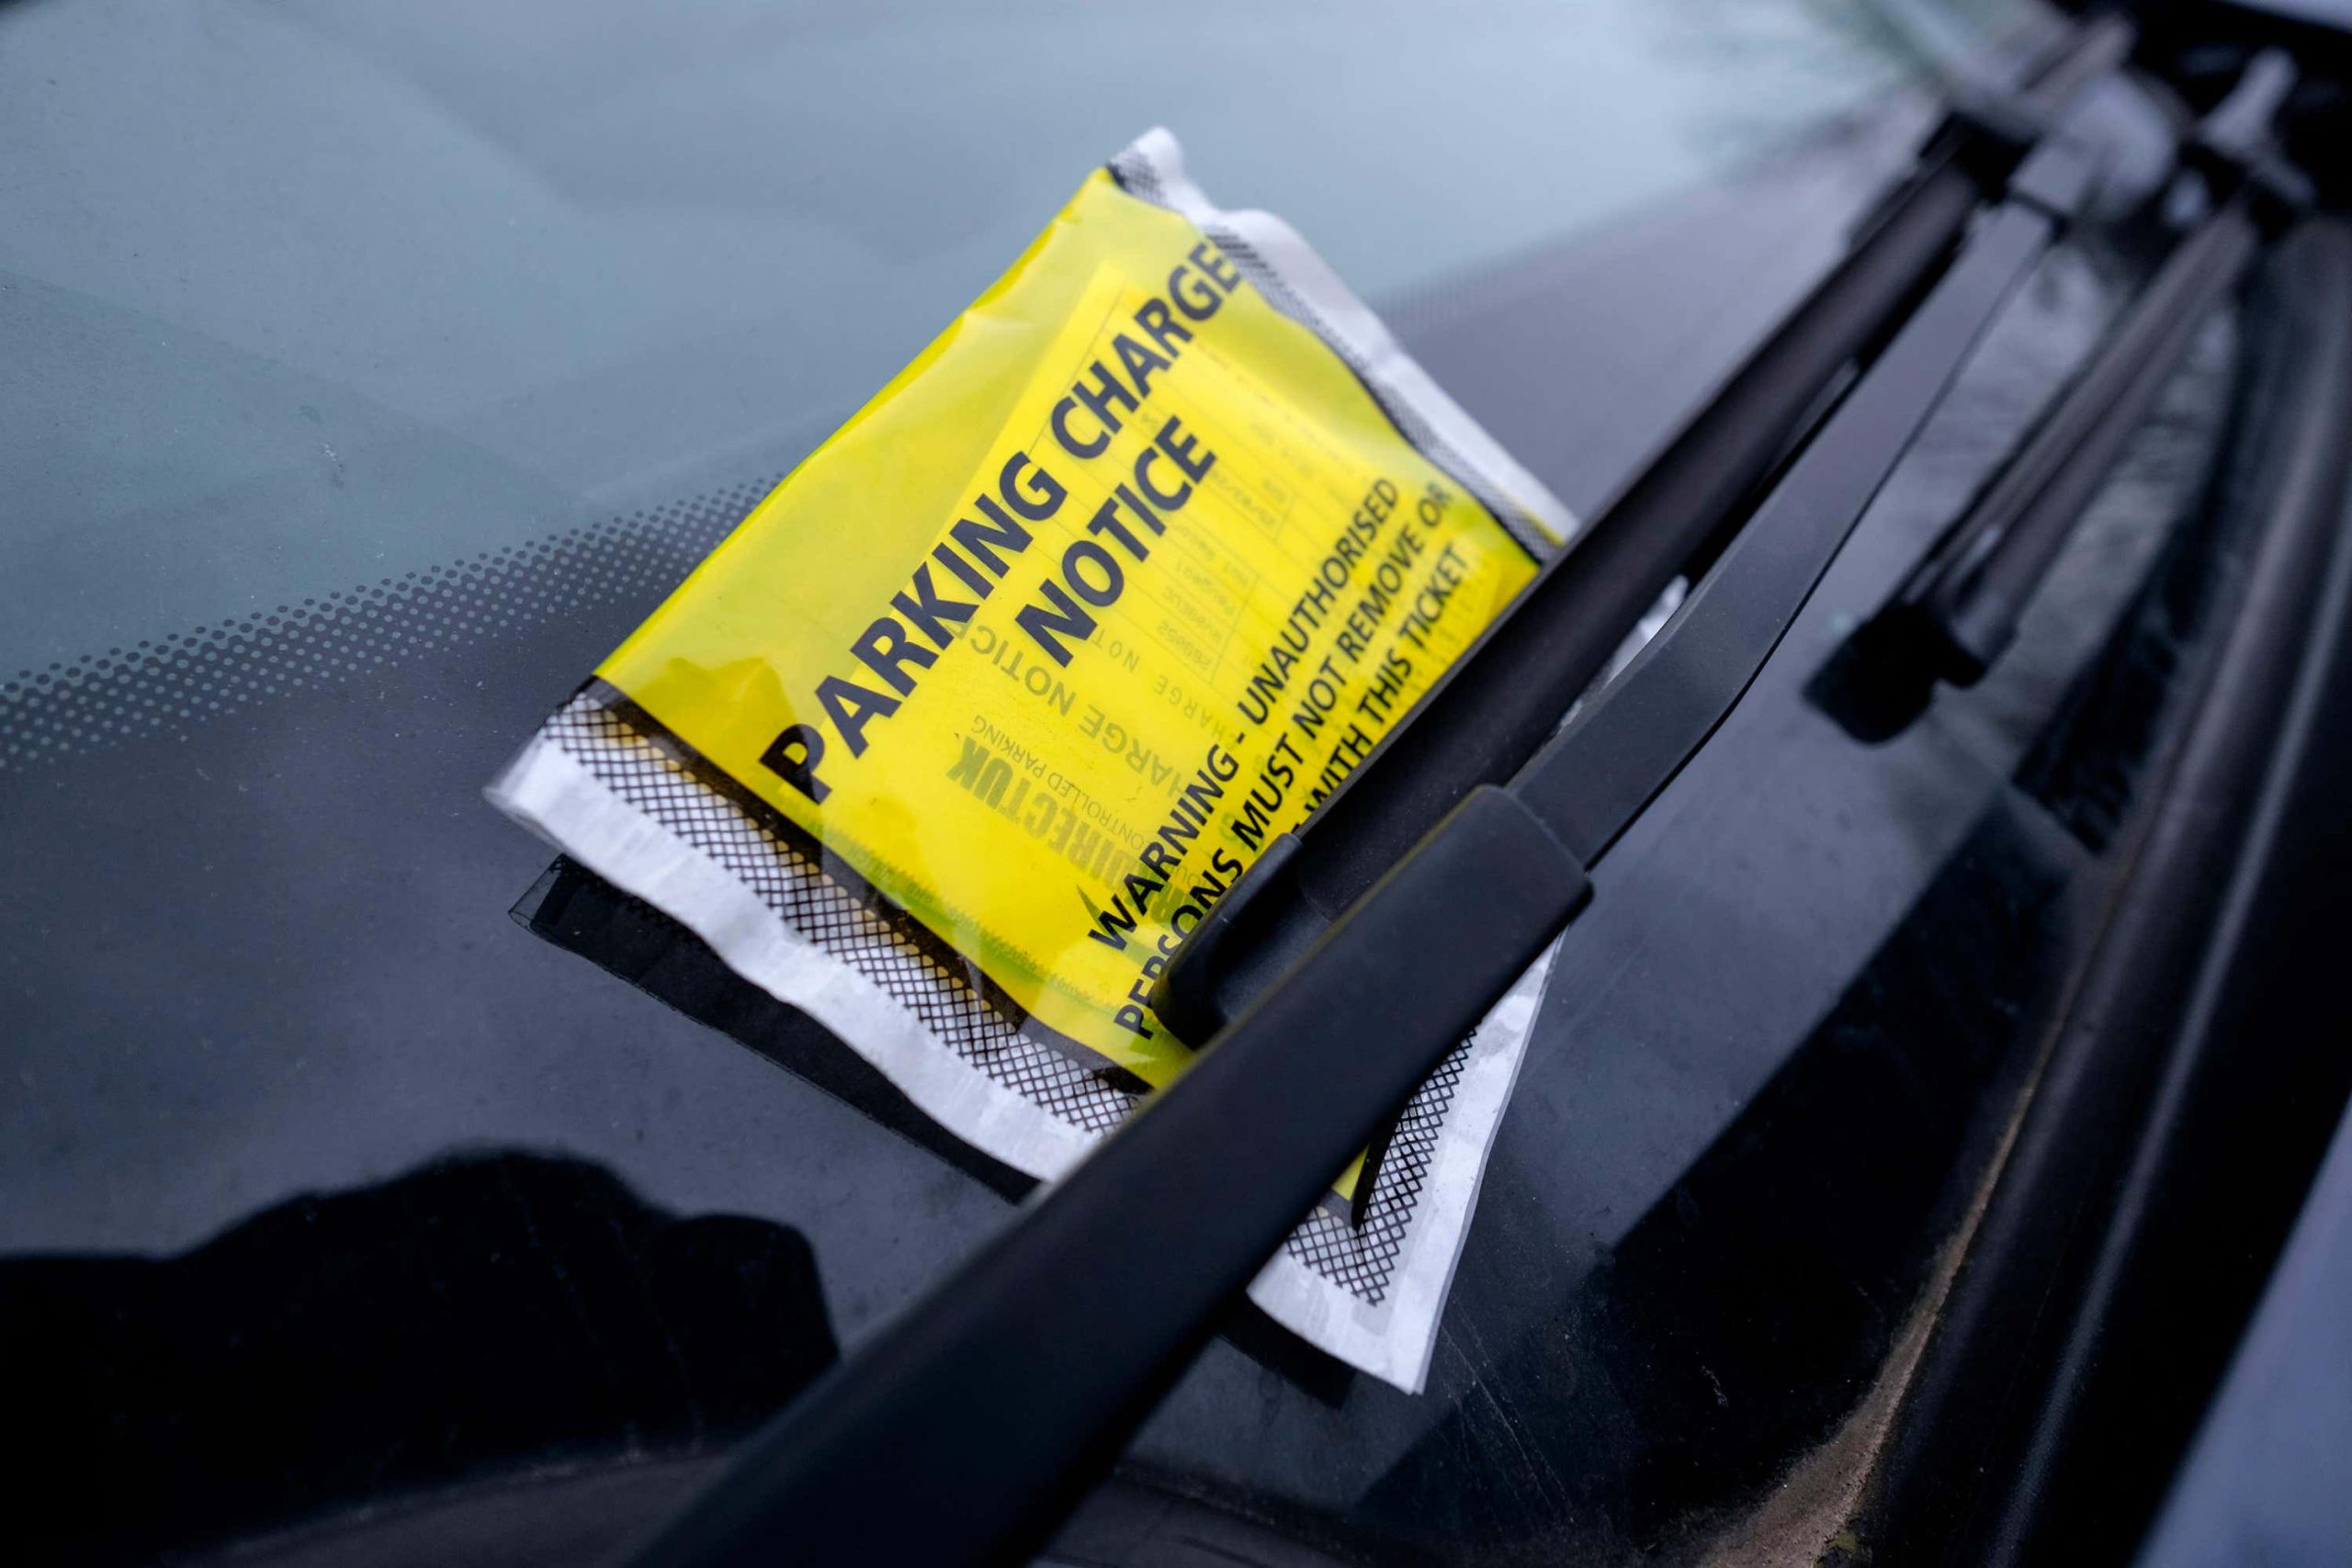 Drivers handed record parking tickets by private firms in a year – 50% increase